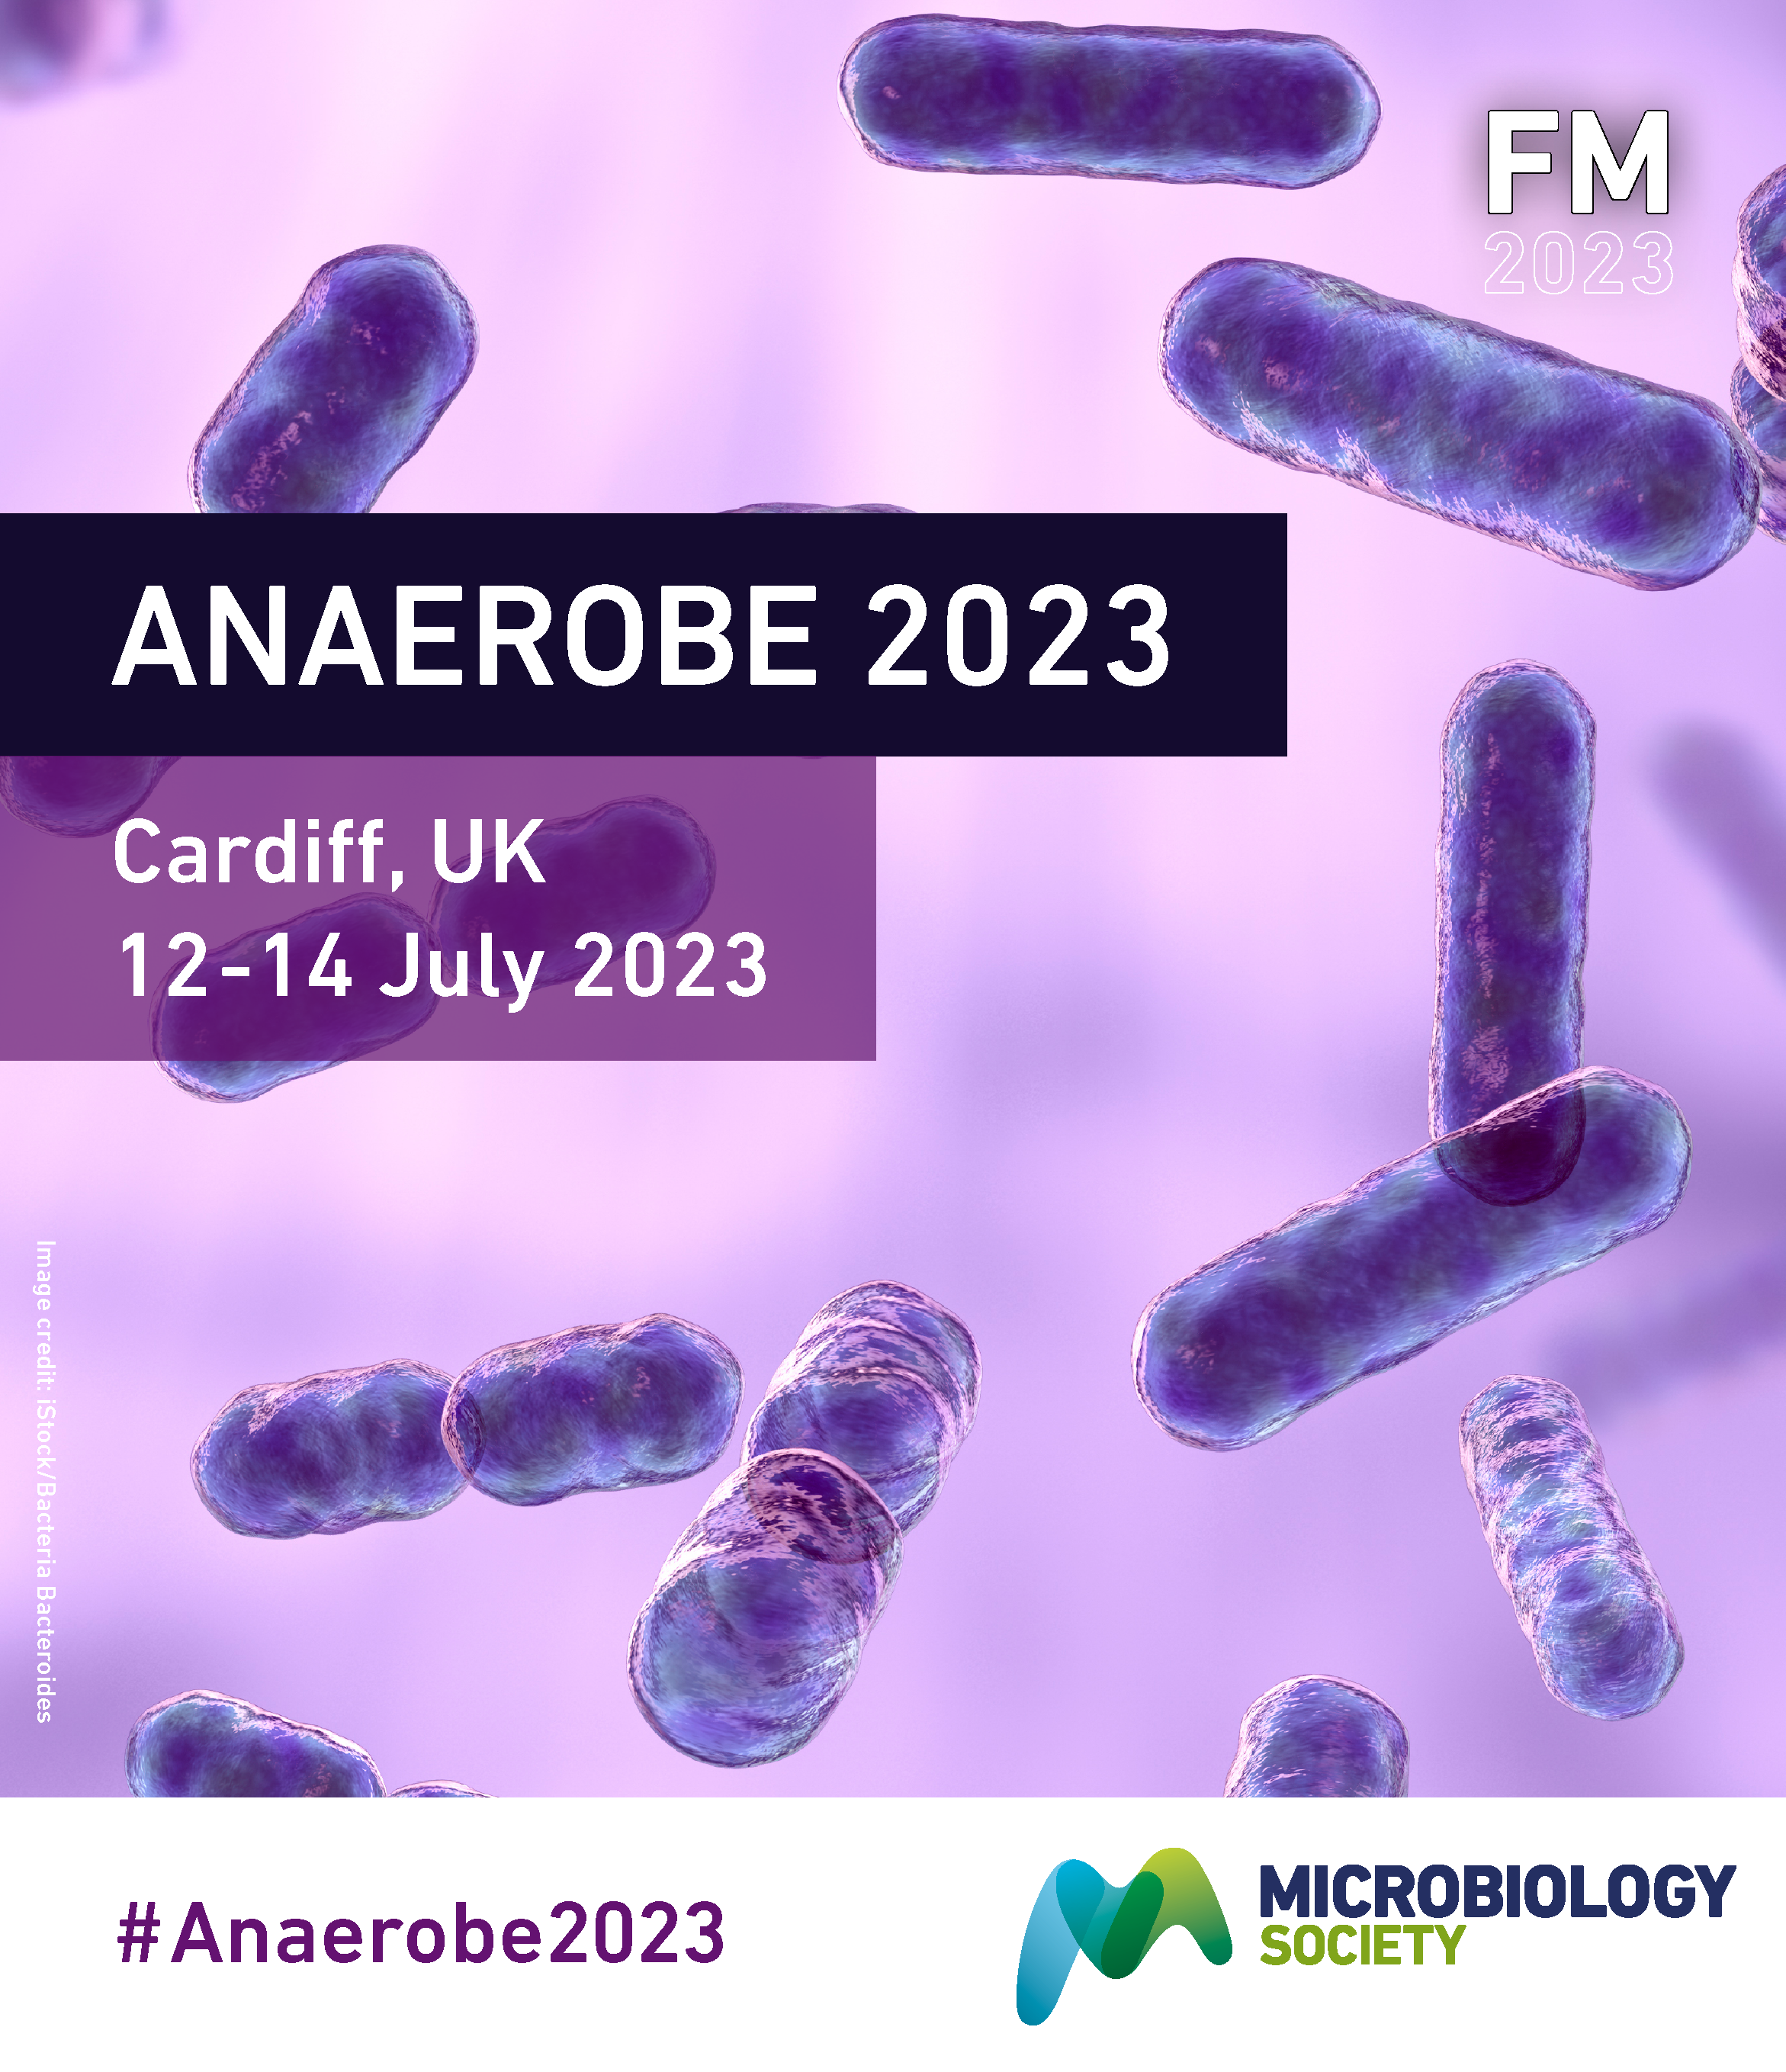 Event poster for Anaerobe 2023, Cardiff, UK, 12-14 July. Picture of microbes in background.